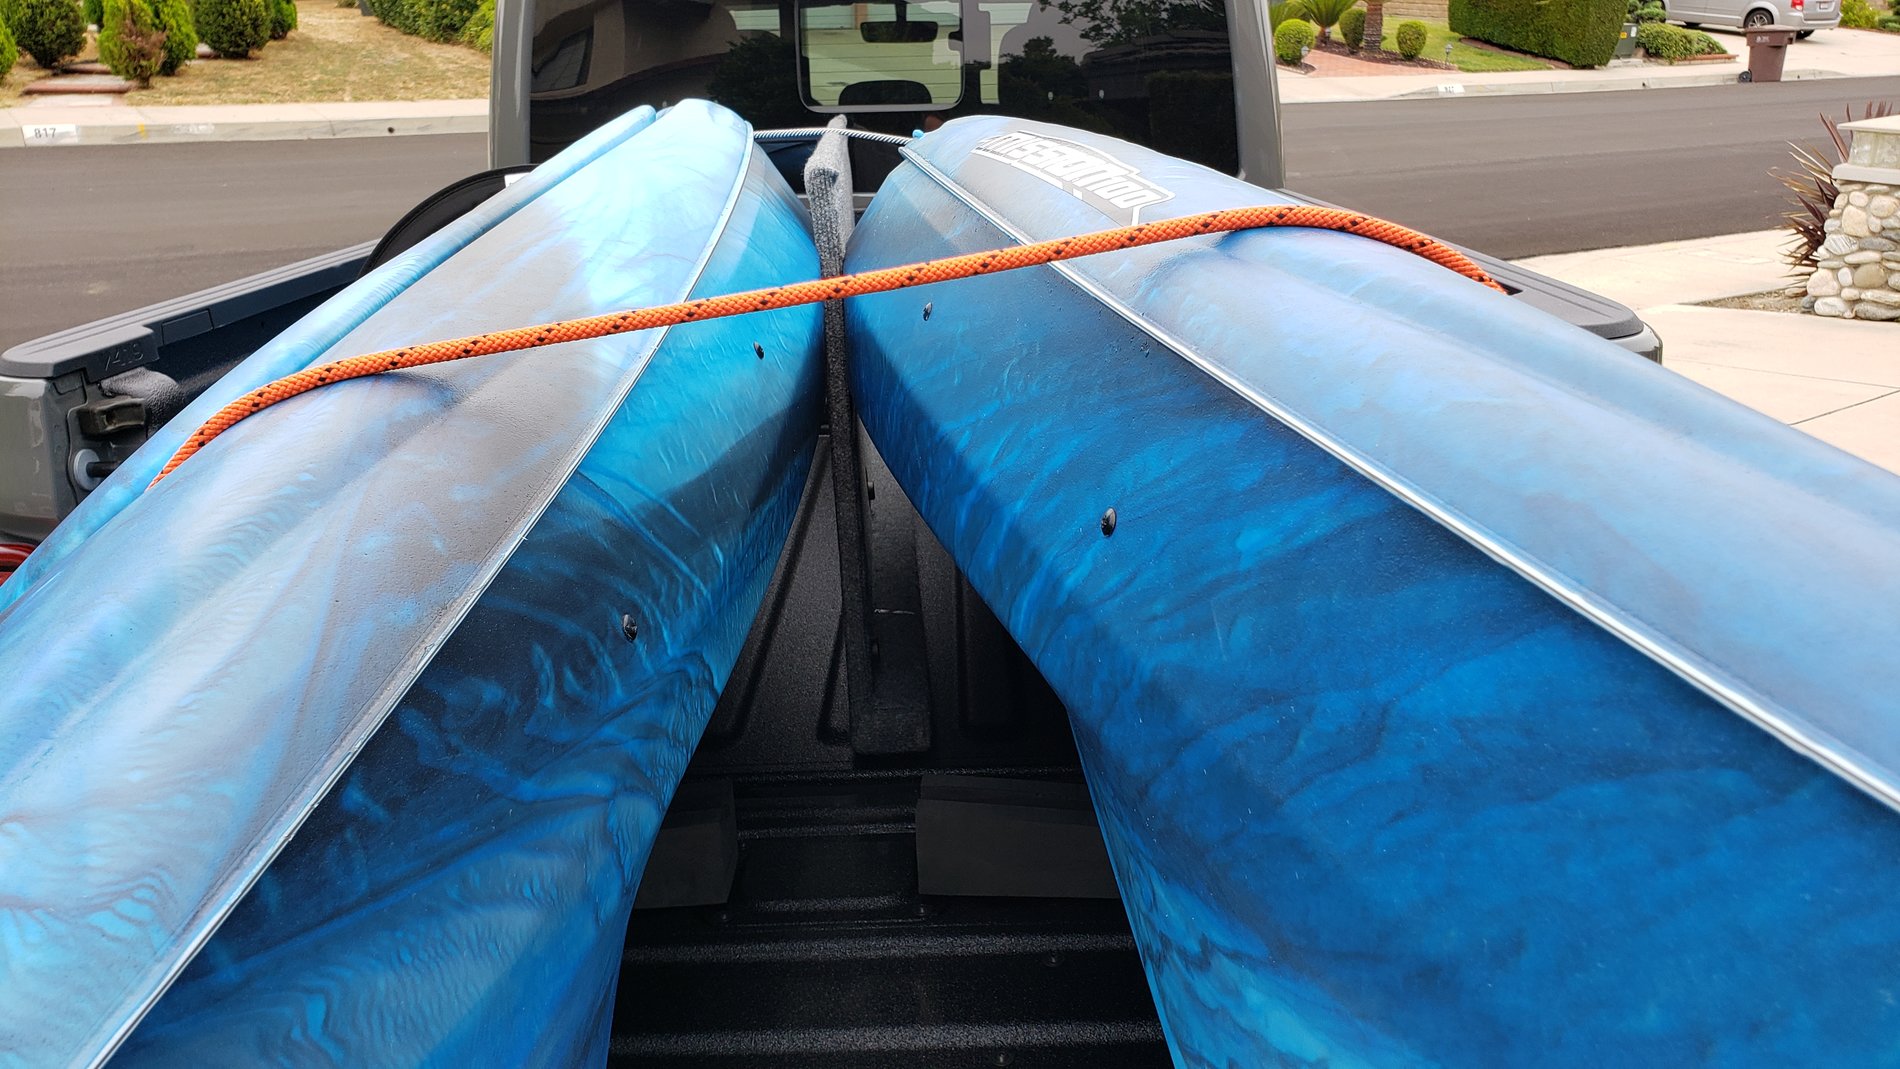 Bed rack/storage for kayaks | Page 6 | Jeep Gladiator (JT) News, Forum ...